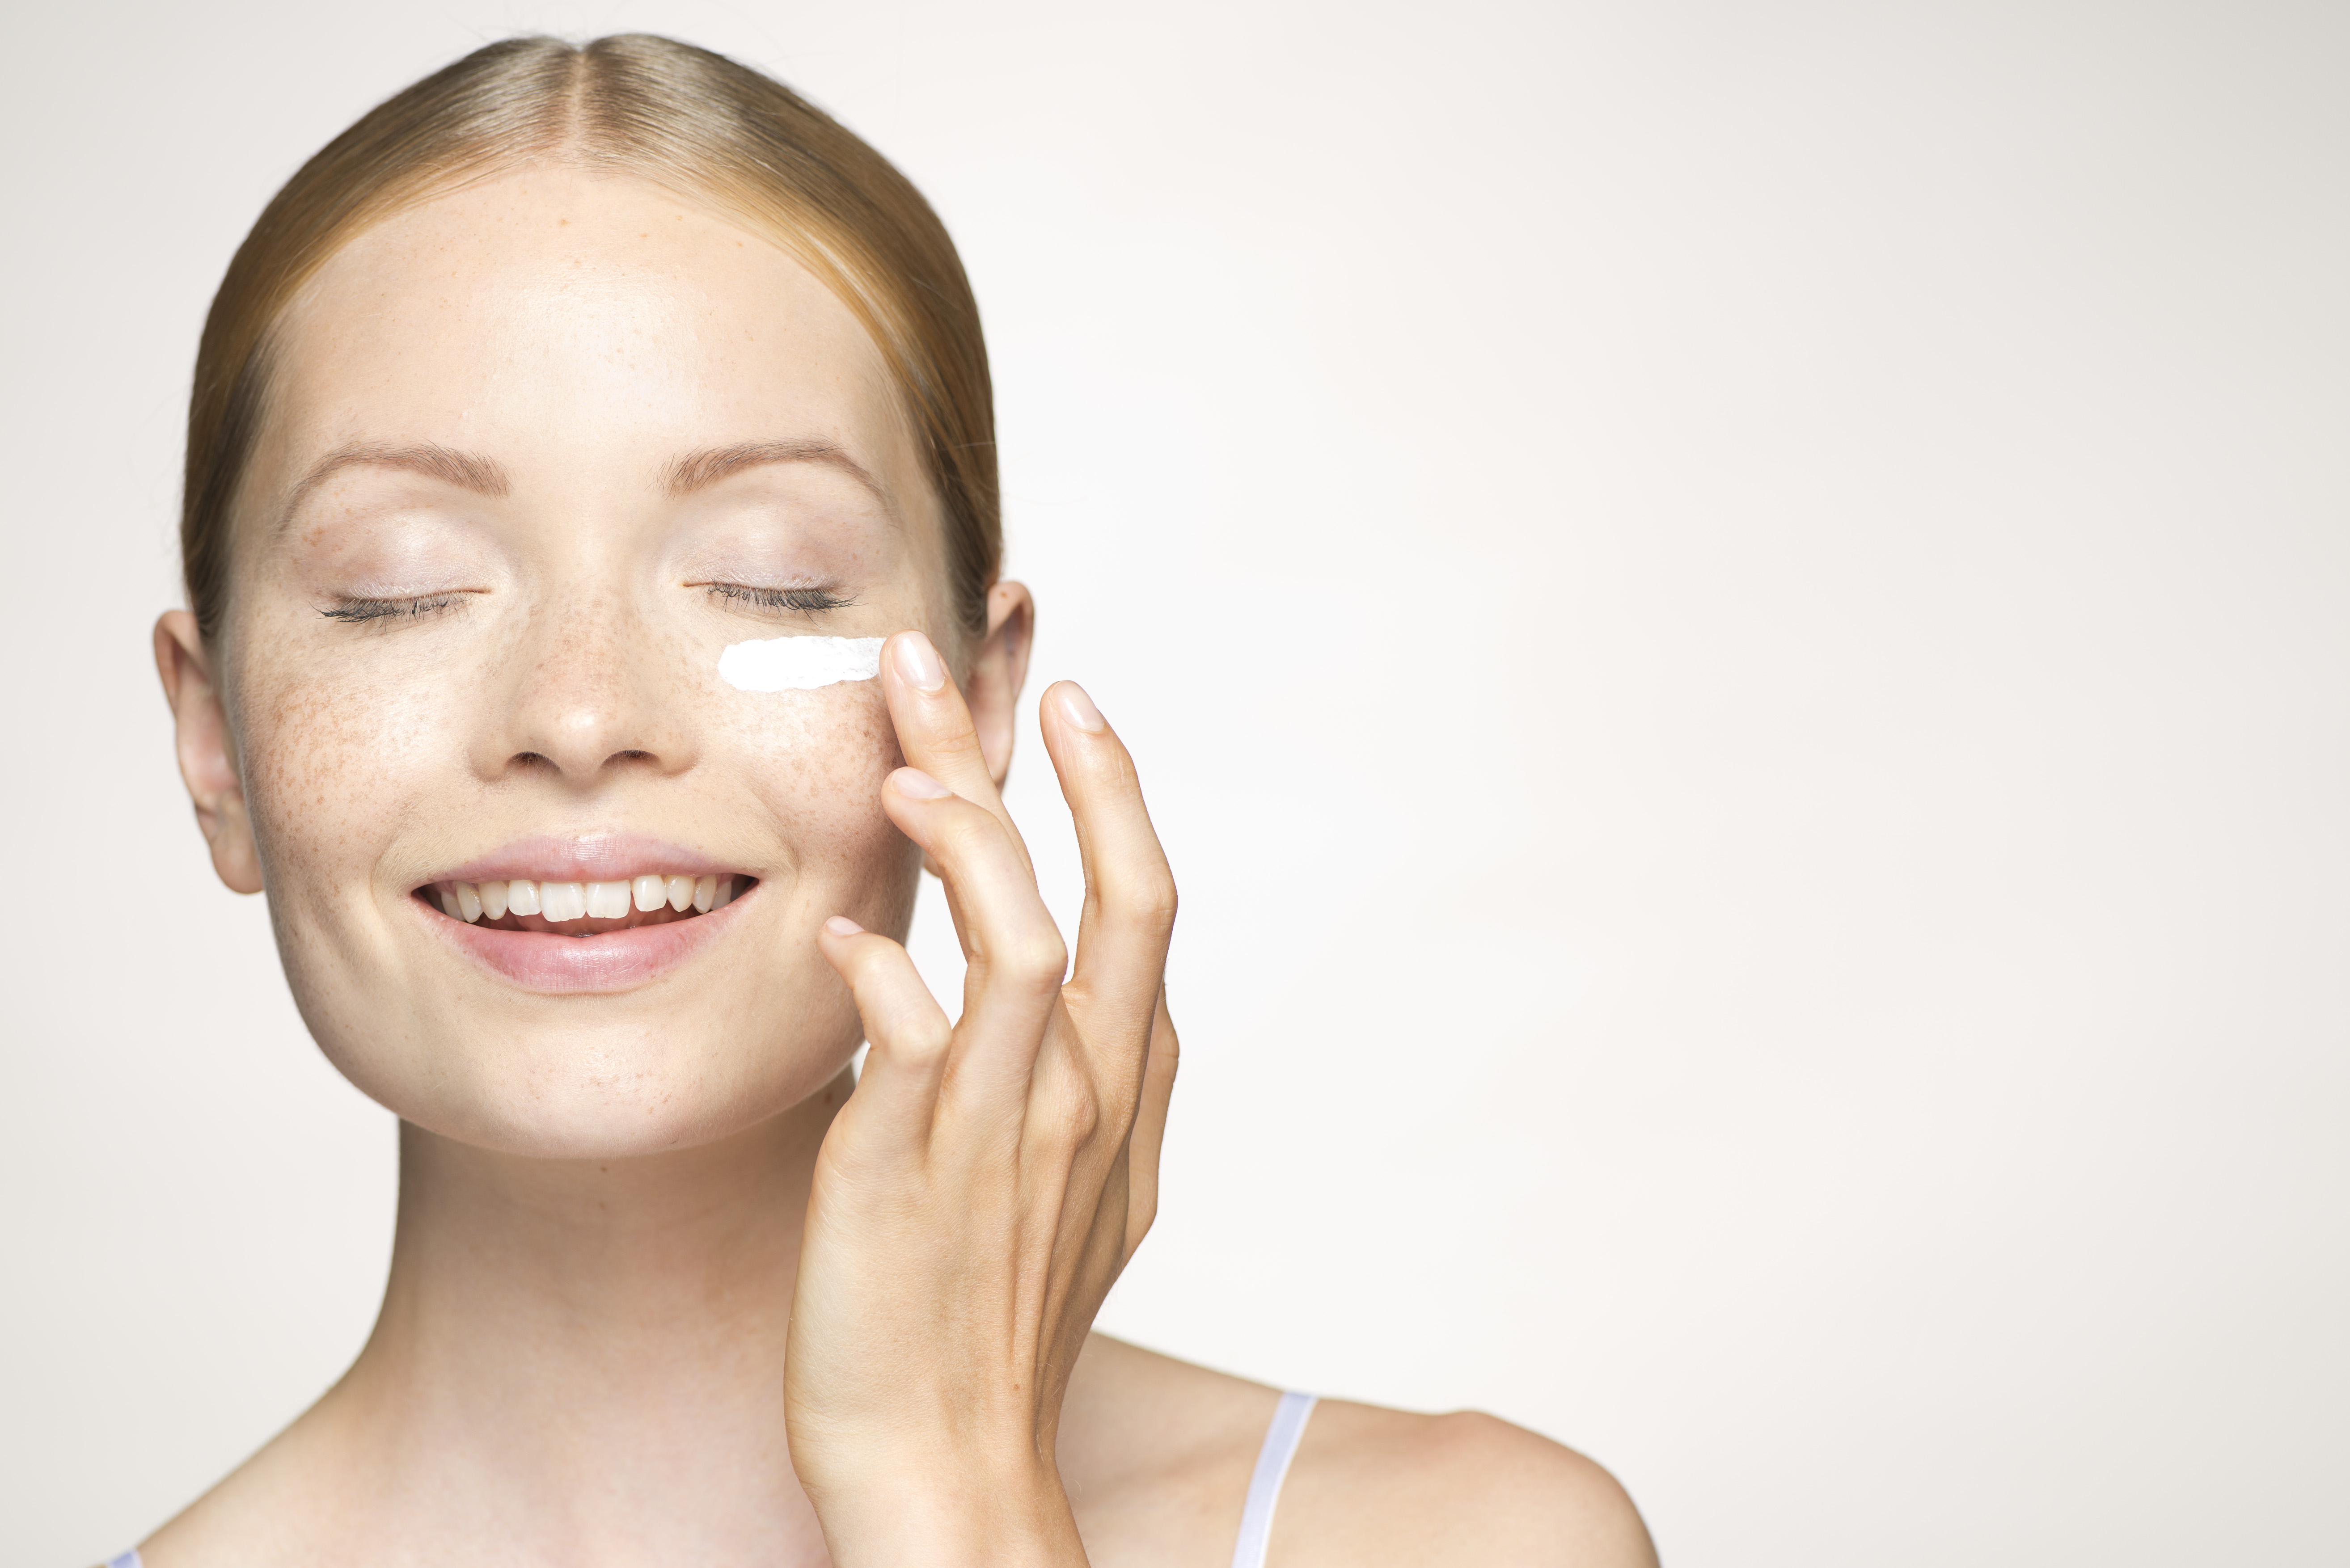 7 most effective ways to prepare skin for makeup #4